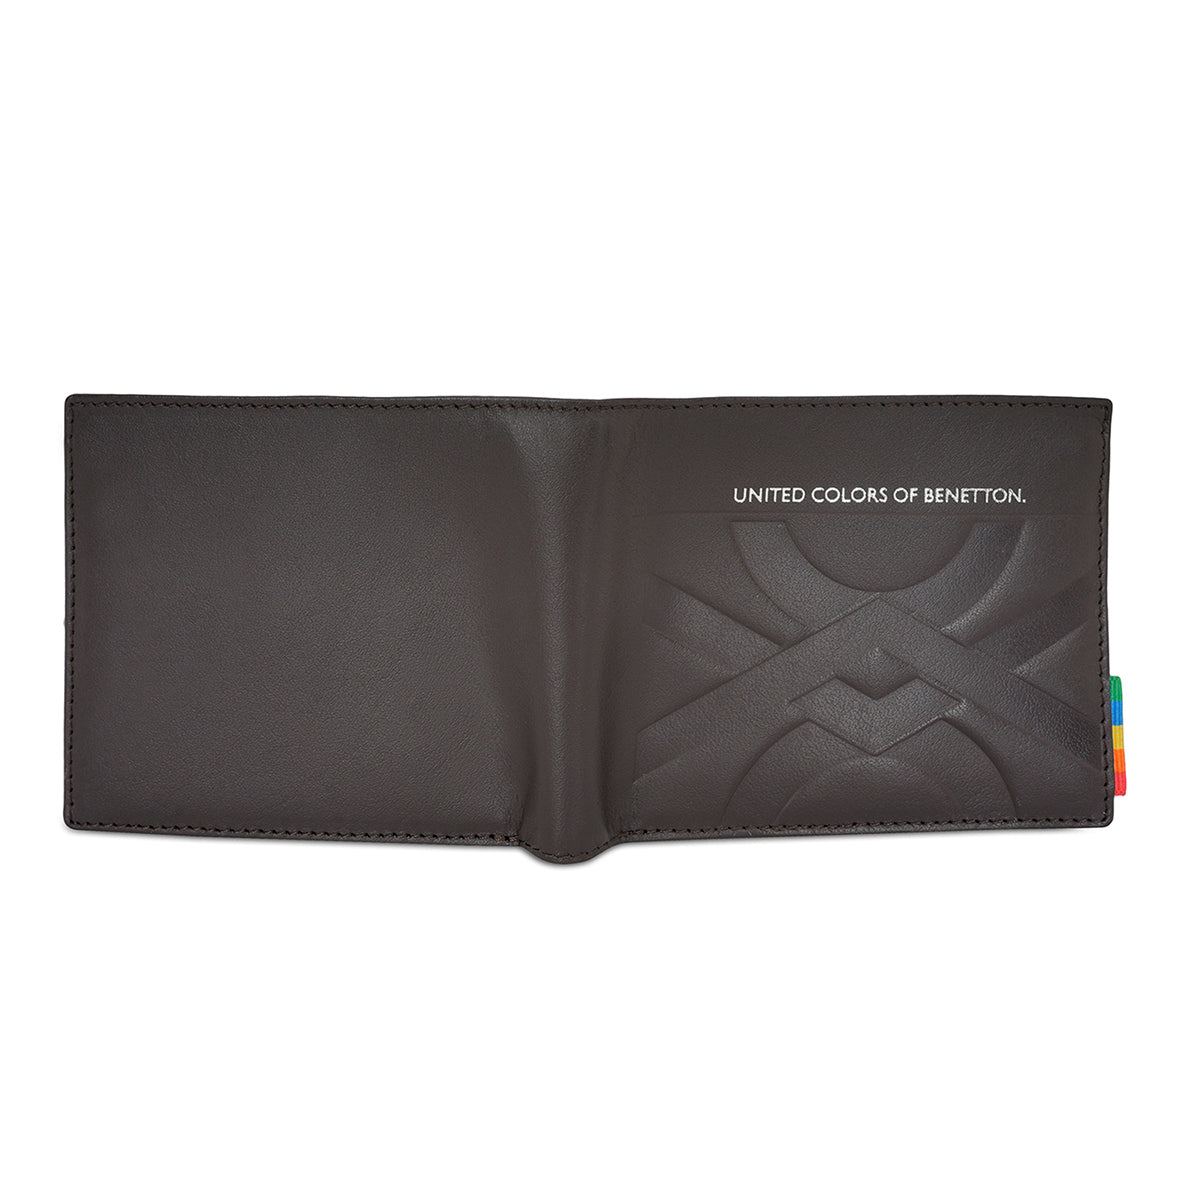 United Colors of Benetton Placido Passcase Wallet Brown